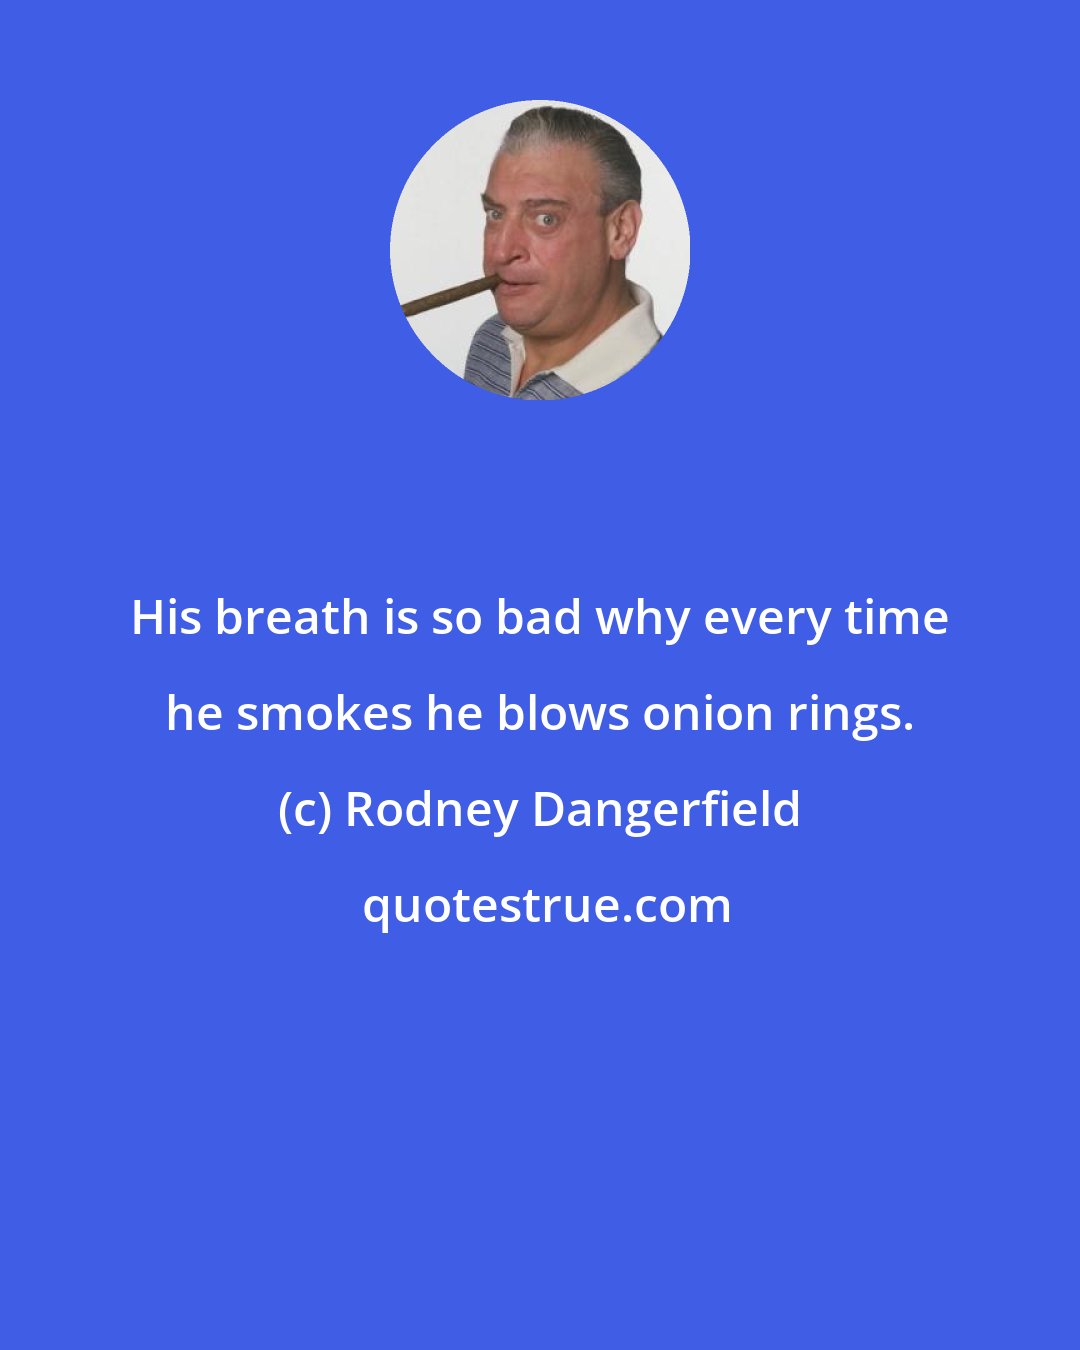 Rodney Dangerfield: His breath is so bad why every time he smokes he blows onion rings.